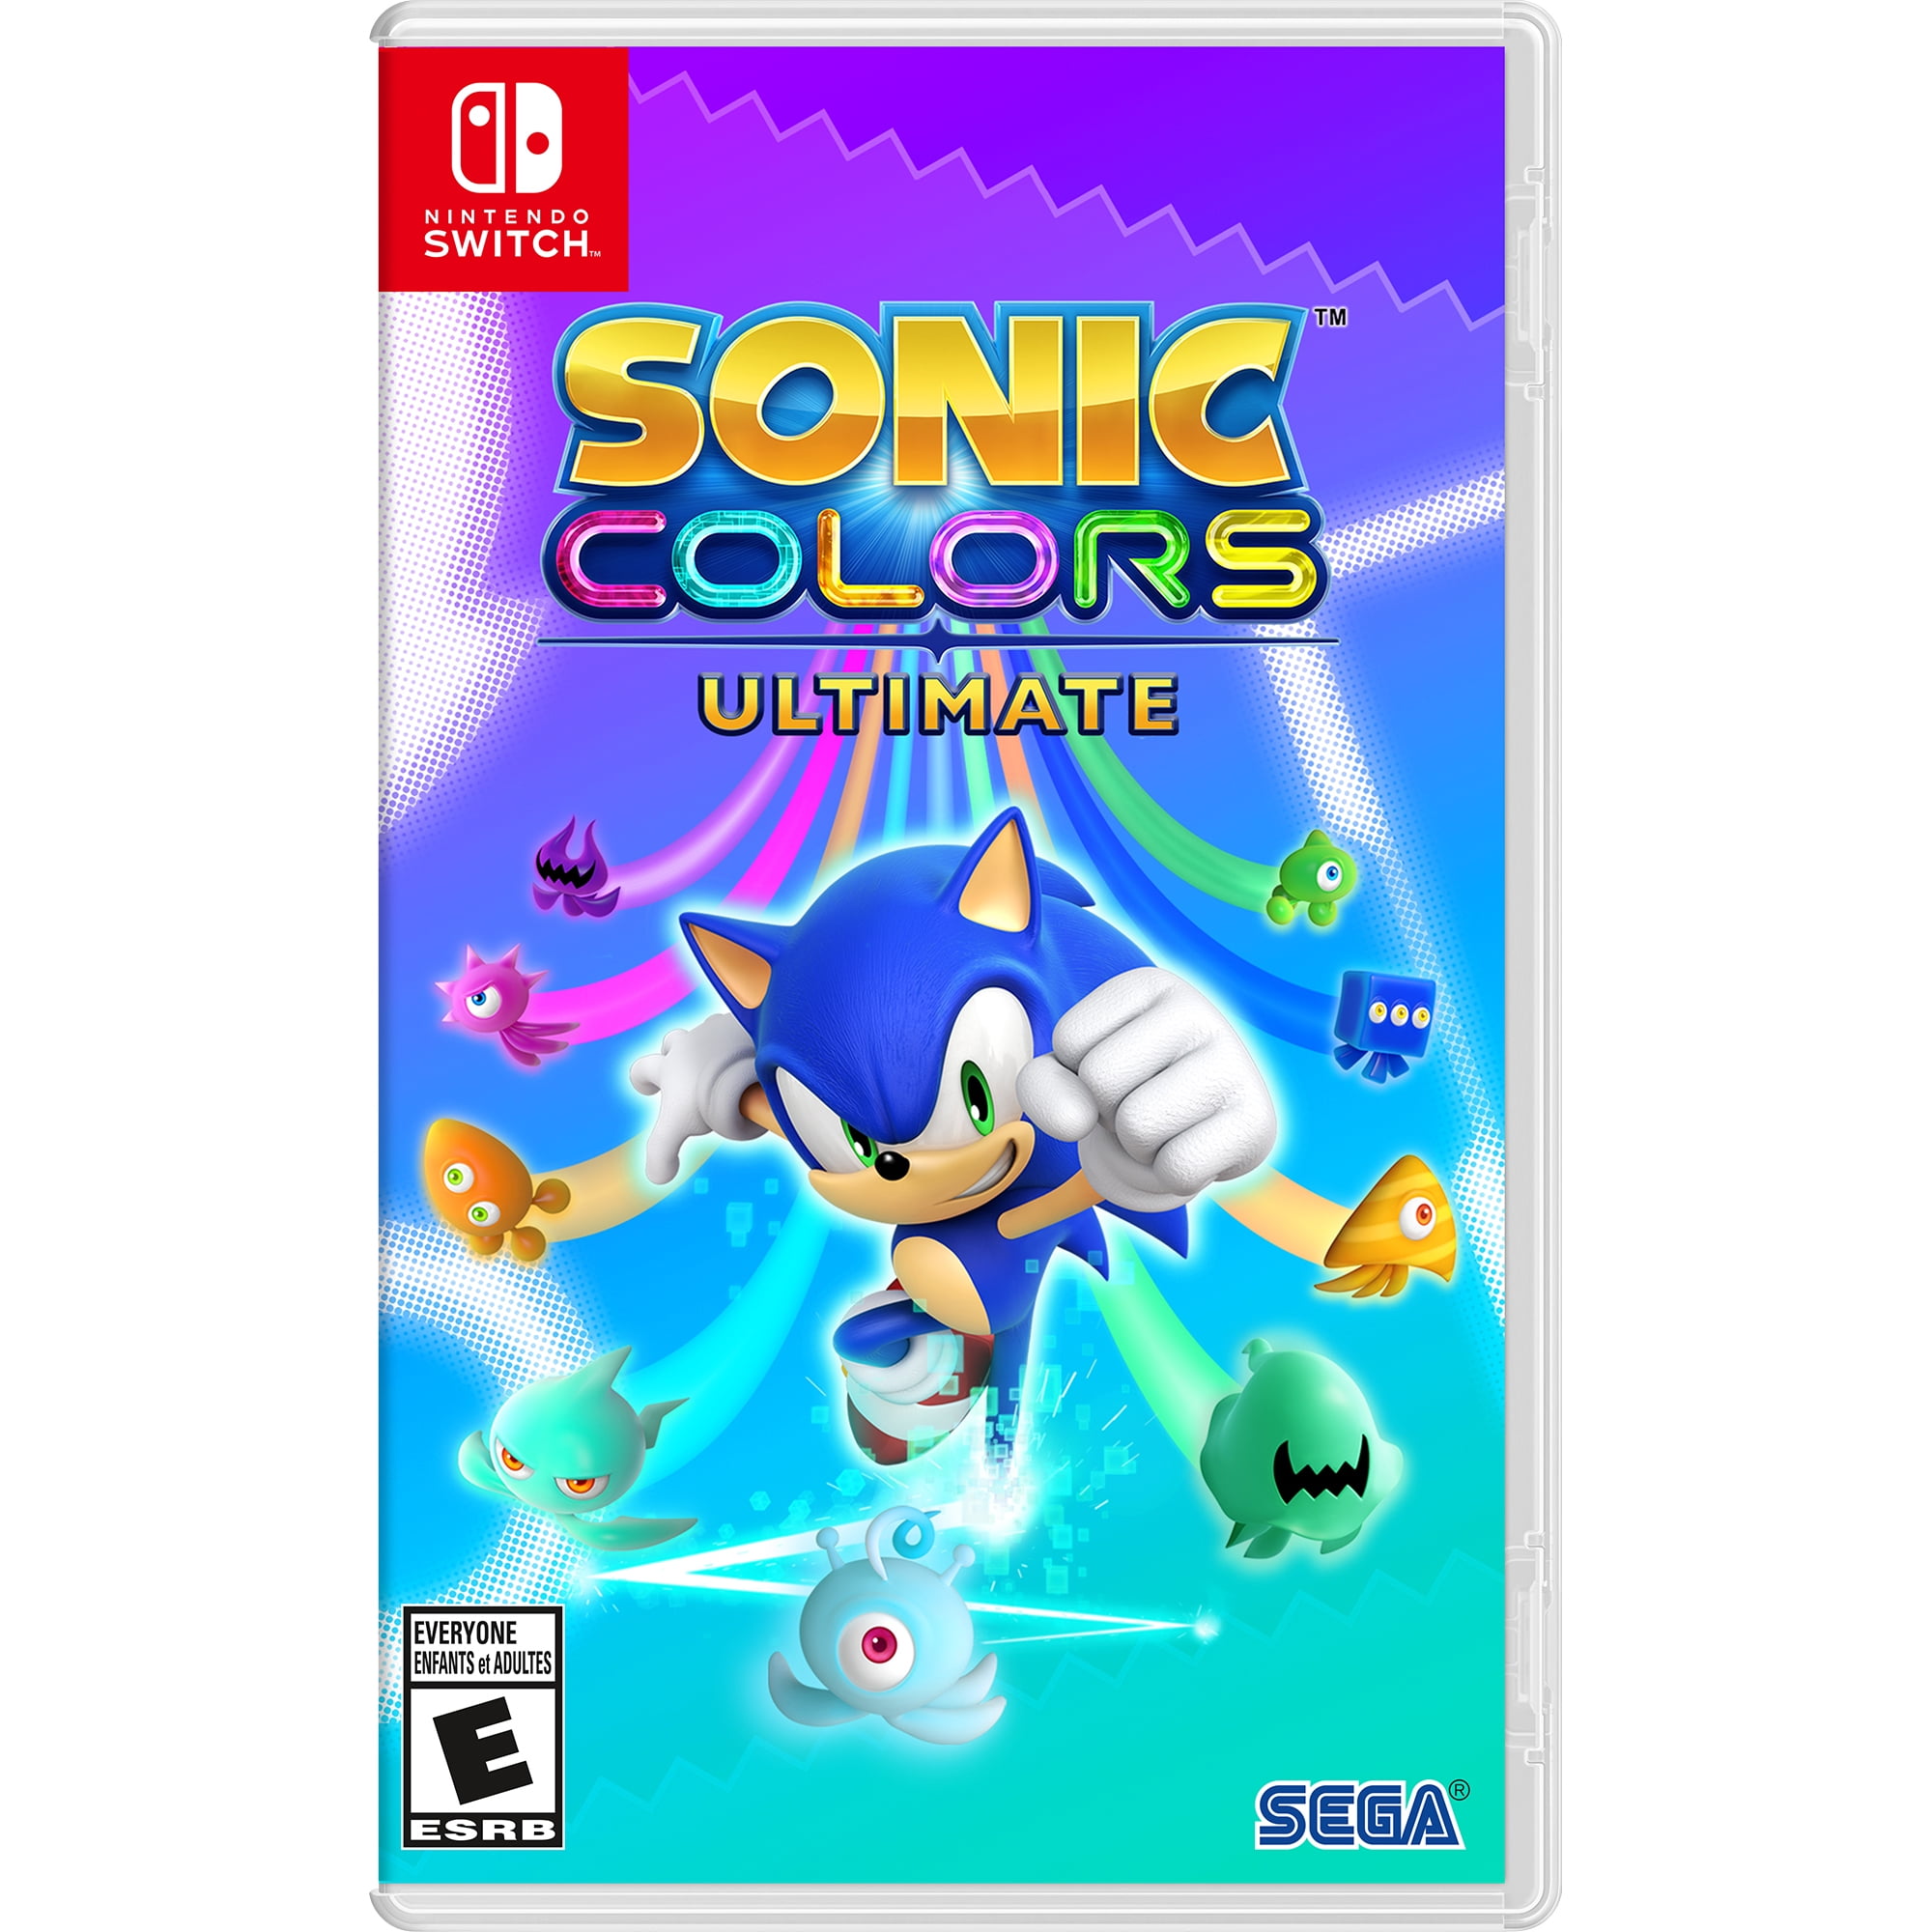 Sonic Colors: Ultimate on PS4 — price history, screenshots, discounts • USA